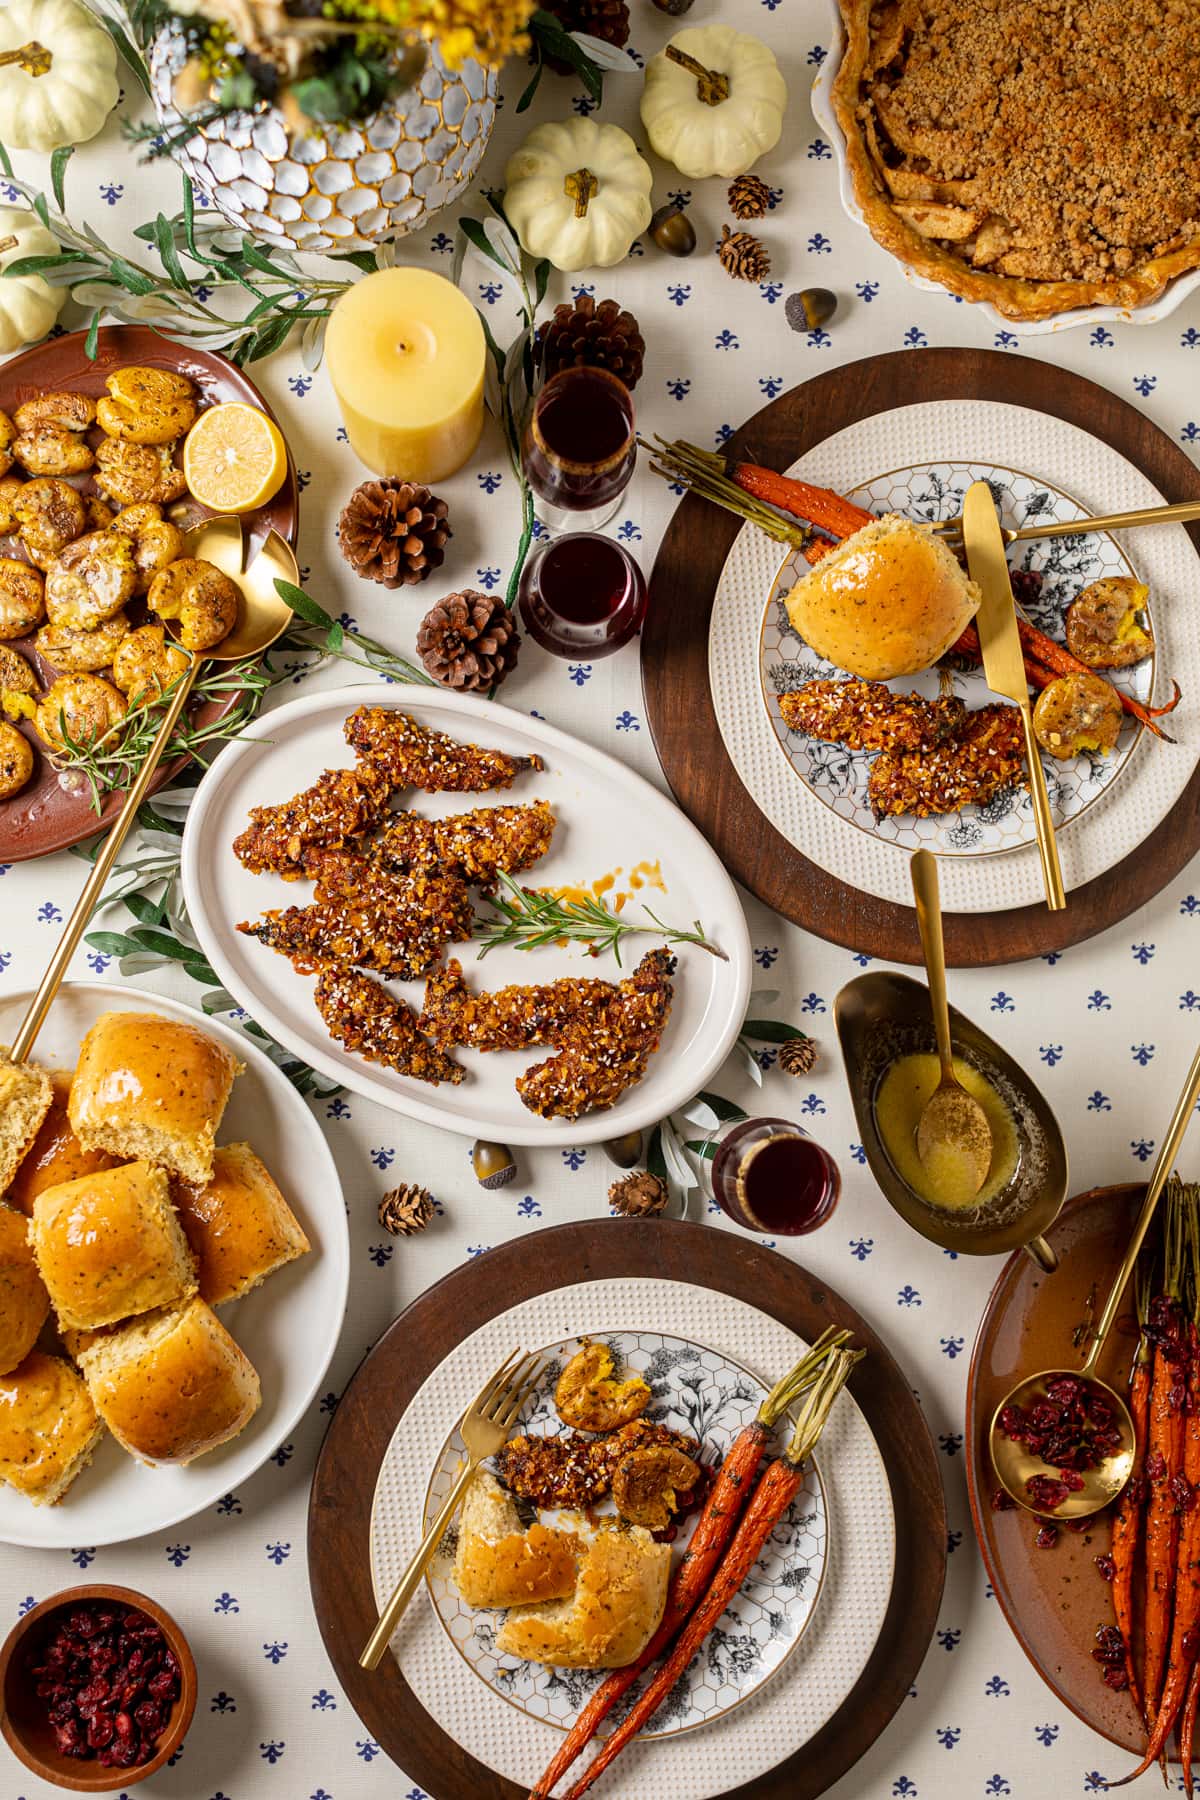 Tips And Tricks to Hosting Thanksgiving